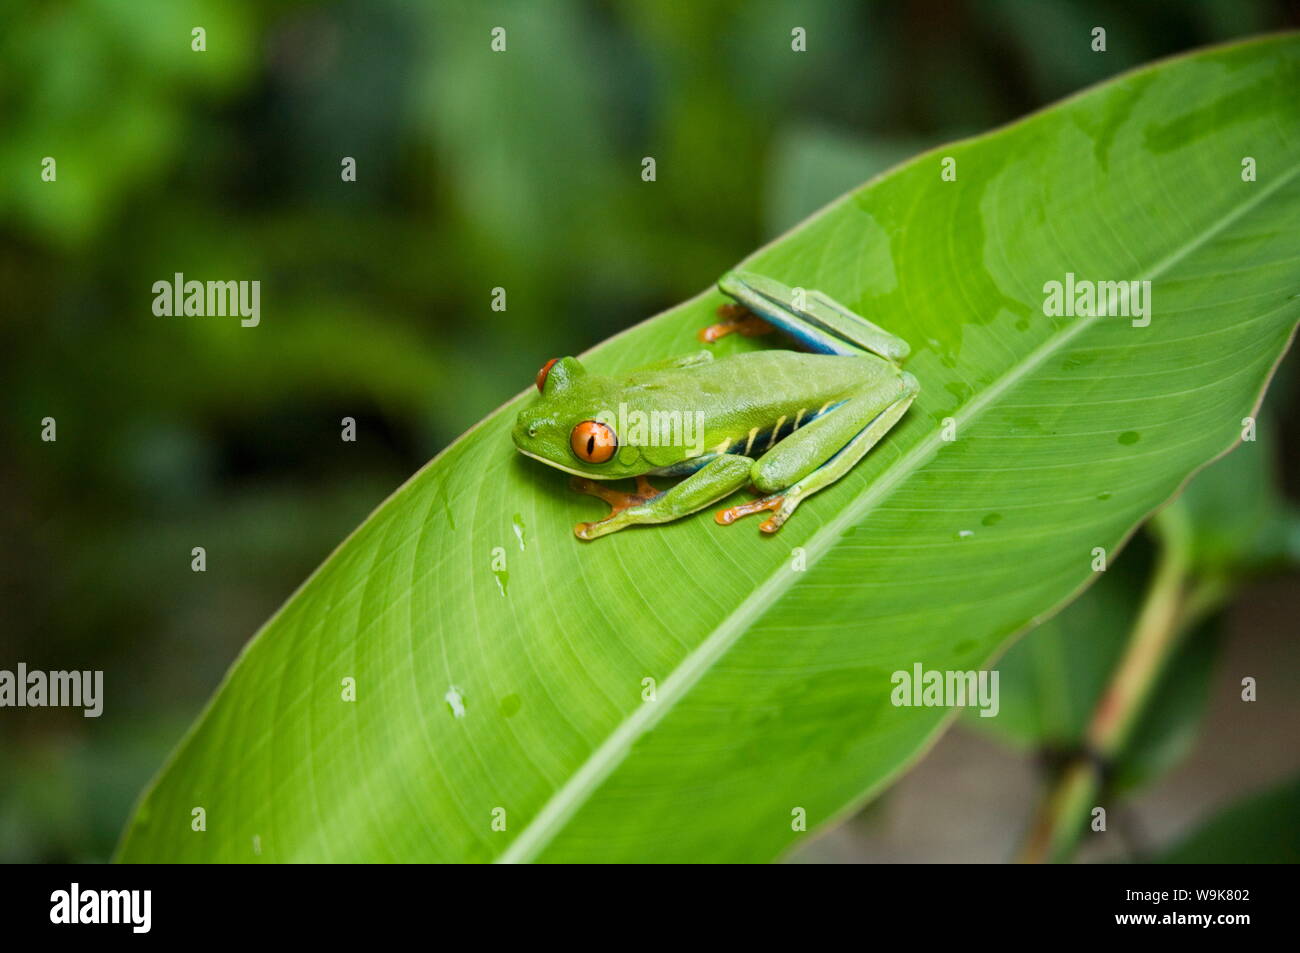 Red eyed tree frog, Tortuguero National Park, Costa Rica Stock Photo